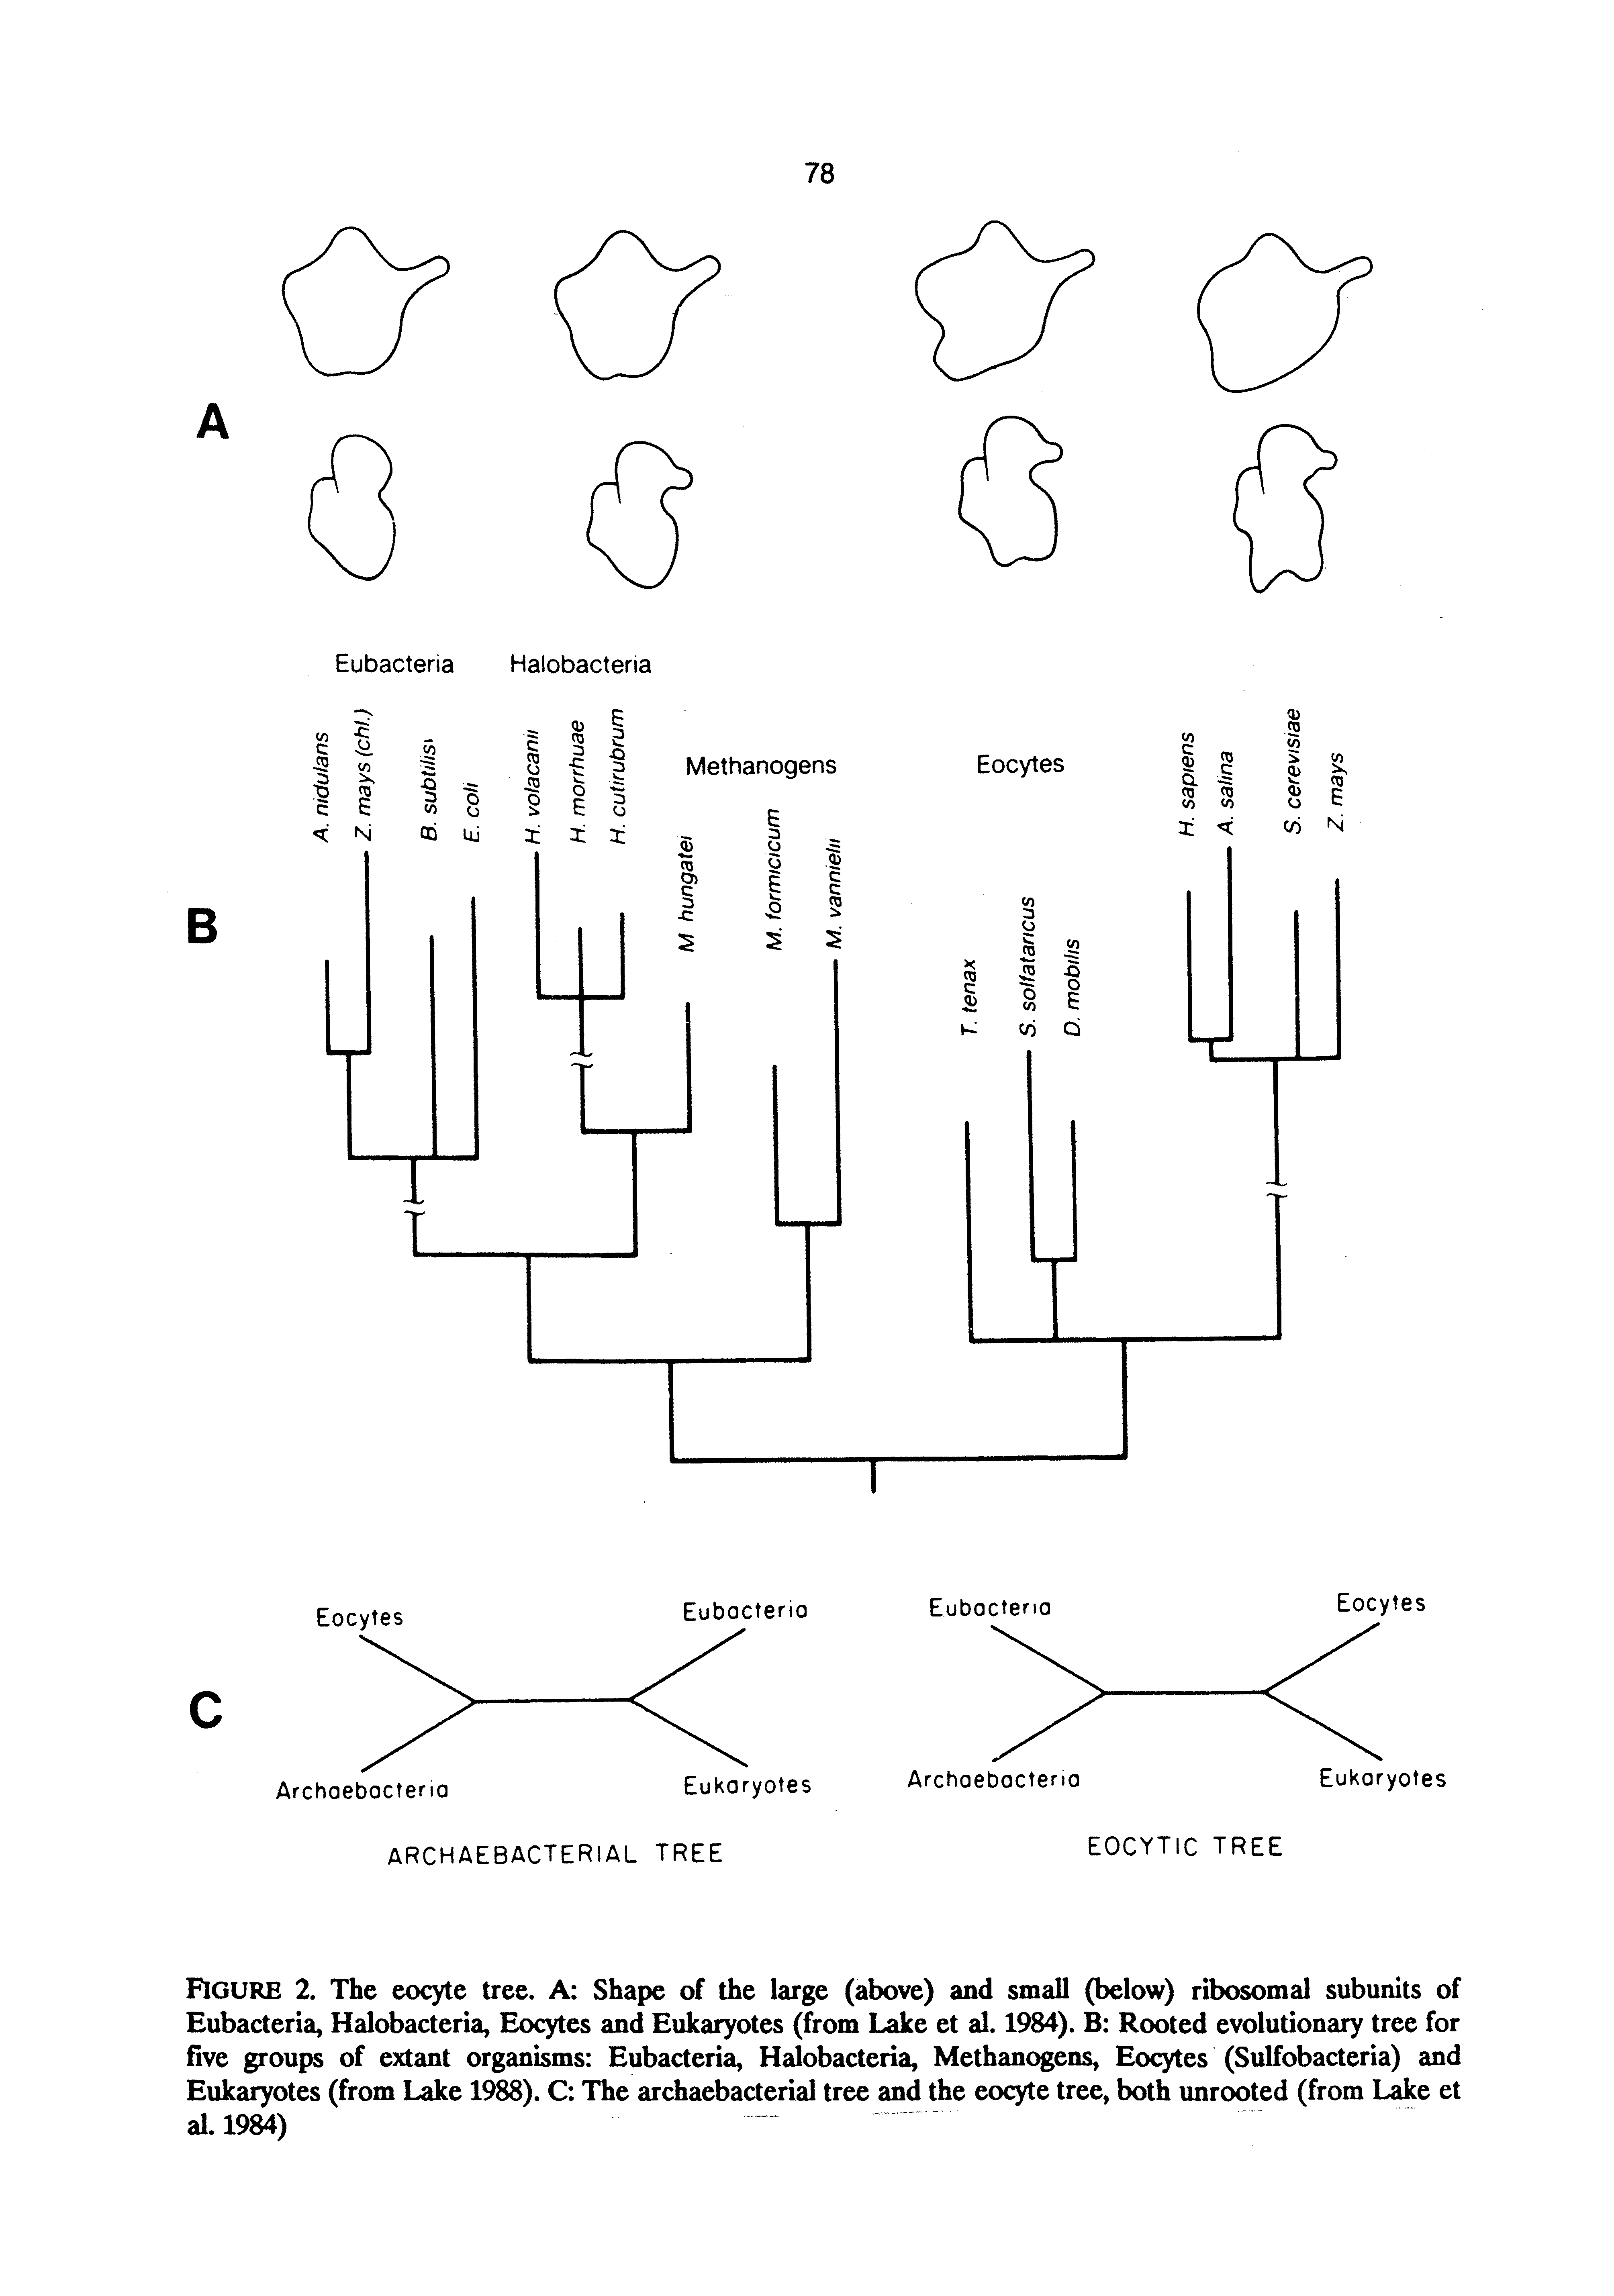 Figure 2. The eoc>te tree. A Shape of the large (above) and small (below) ribosomal subunits of Eubacteria, Halobacteria, Eocytes and Eukaryotes (from Lake et al. 1984). B Rooted evolutionary tree for five groups of extant organisms Eubacteria, Halobacteria, Methanogens, Eocytes (Sulfobacteria) and Eukaryotes (from Lake 1988). C The archaebacterial tree and the eocyte tree, both unrooted (from Lake et al.l984)...